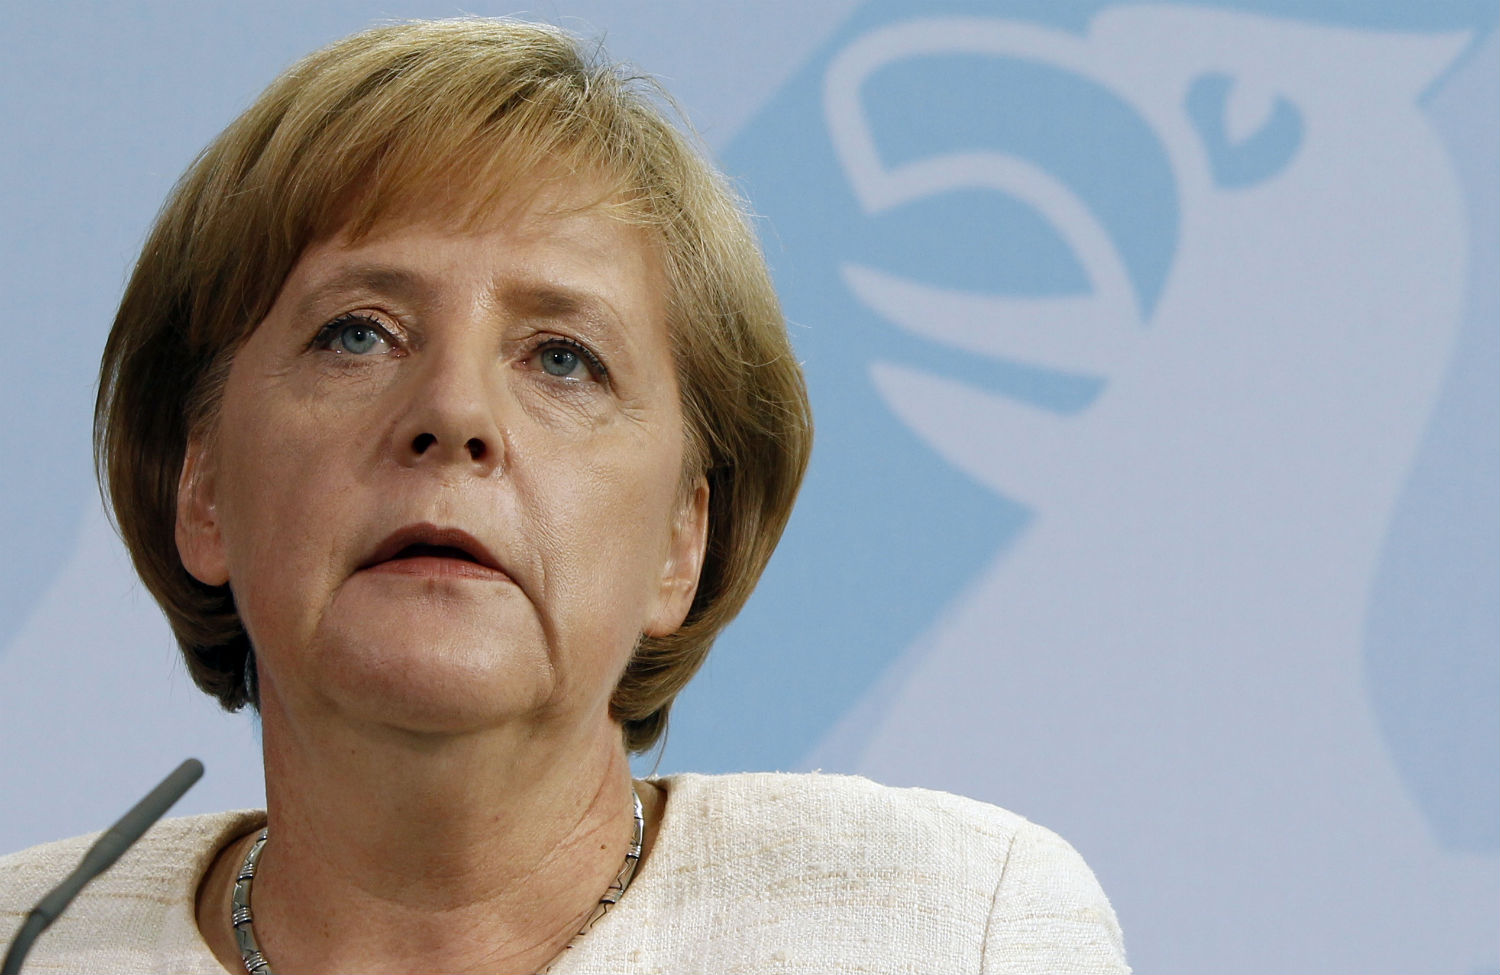 Letter From Berlin: Why Are the Germans So Hell-Bent on Austerity?